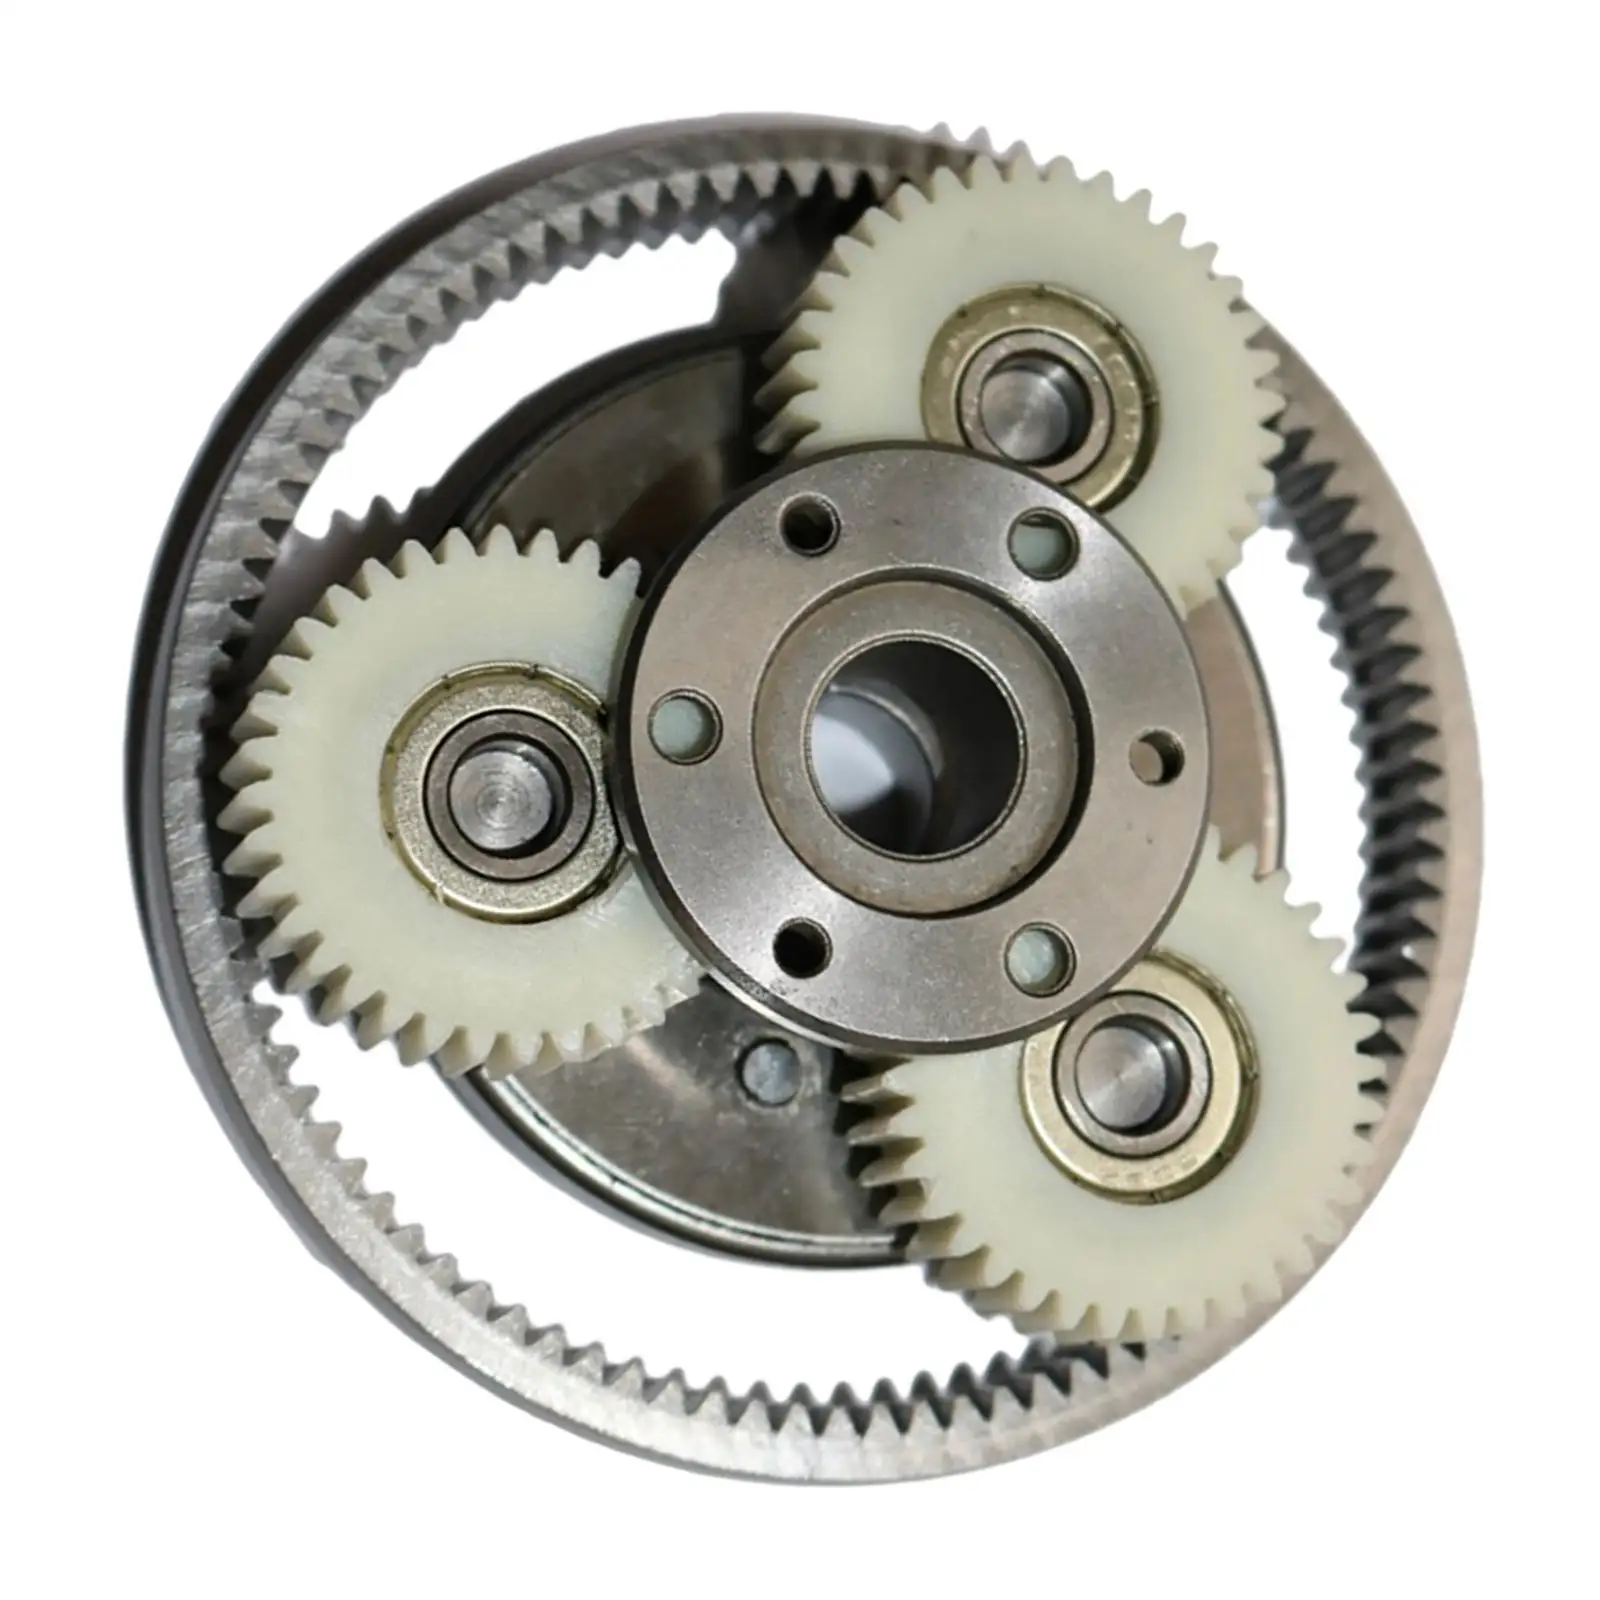  Parts 36T Planetary Gear with Clutch 36mm Thickness:11mm  Gear Set for Bicycle Motor  Electric Bike